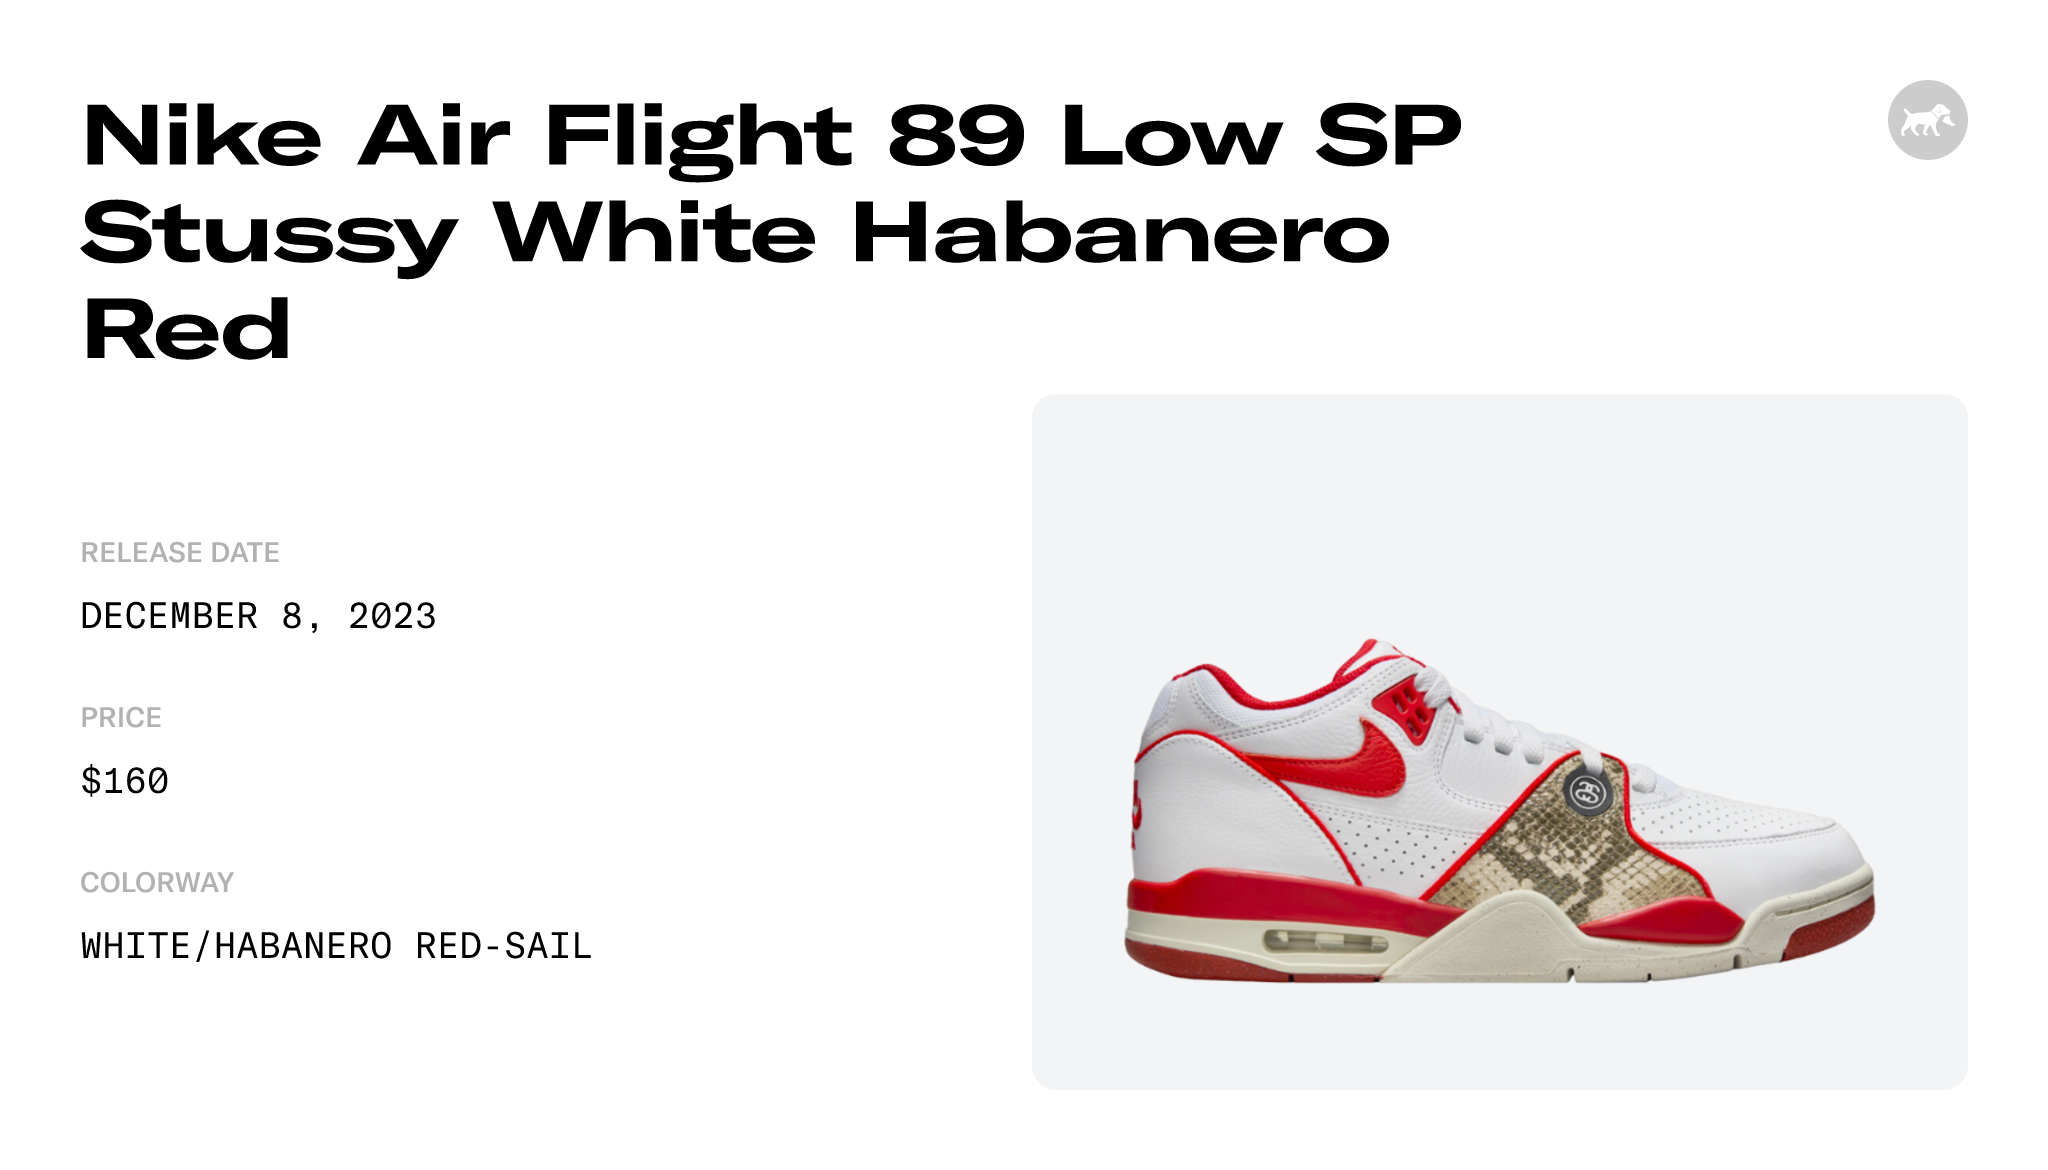 Nike Air Flight 89 Low SP Stussy White Habanero Red - FD6475-101 Raffles and  Release Date